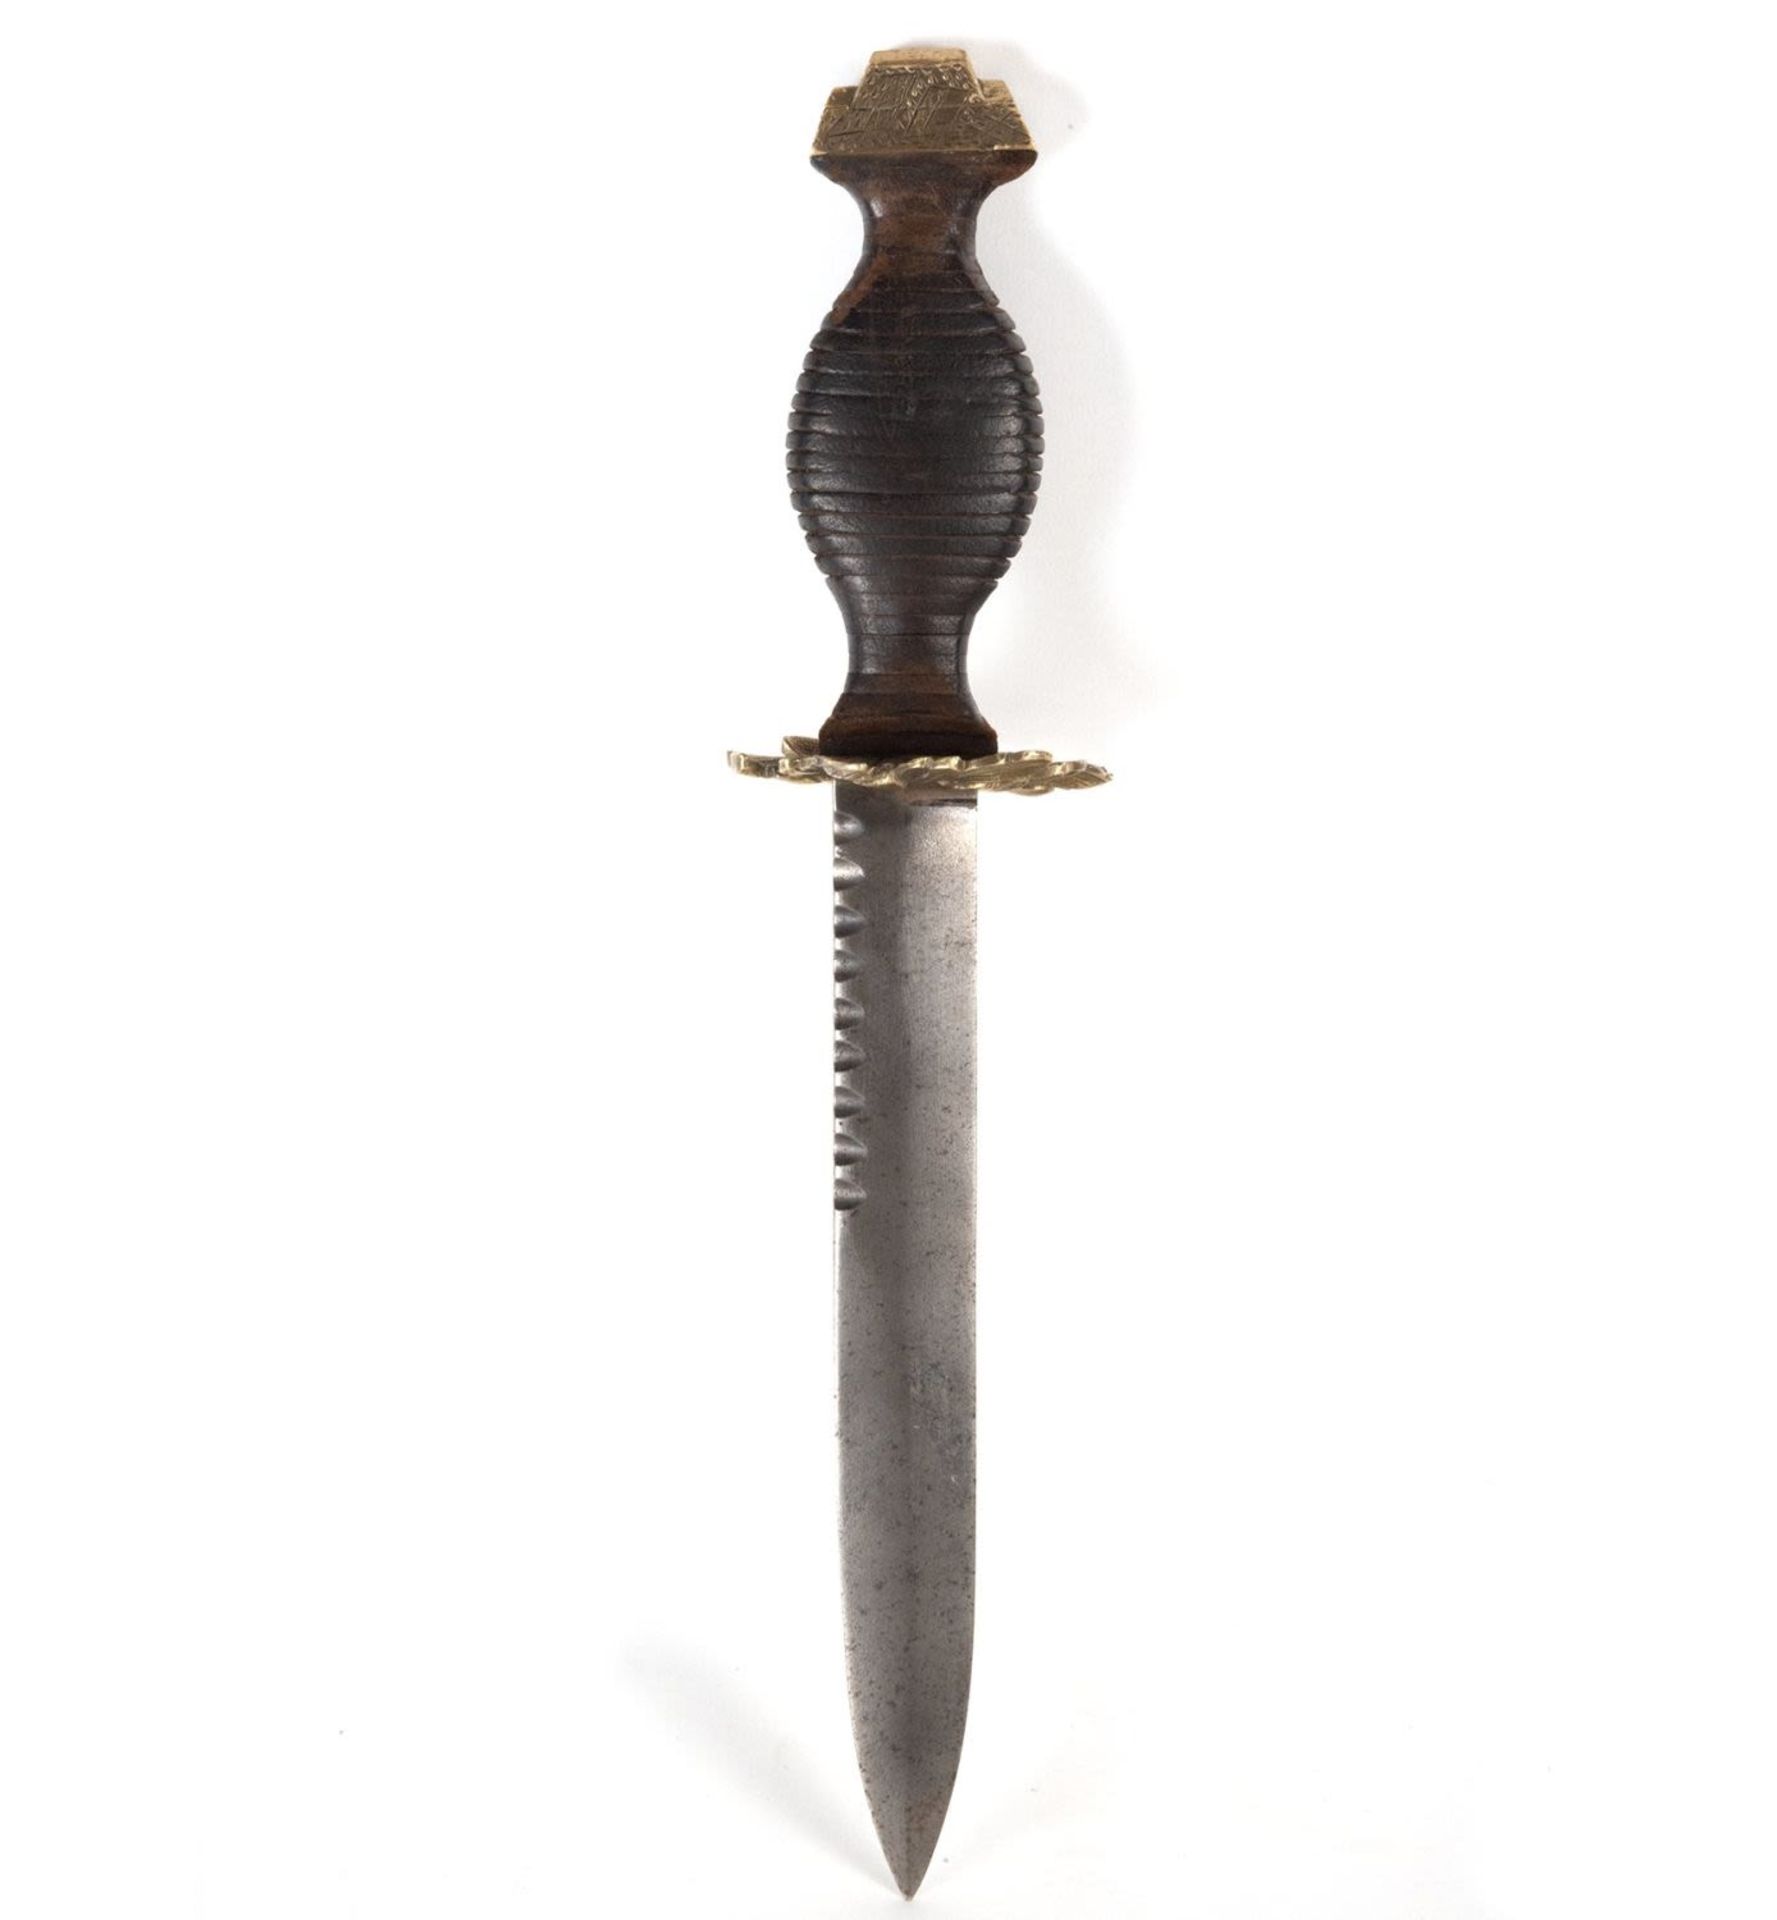 Oriental dagger with handle in Bronze and Wood, 18th century - Image 2 of 4